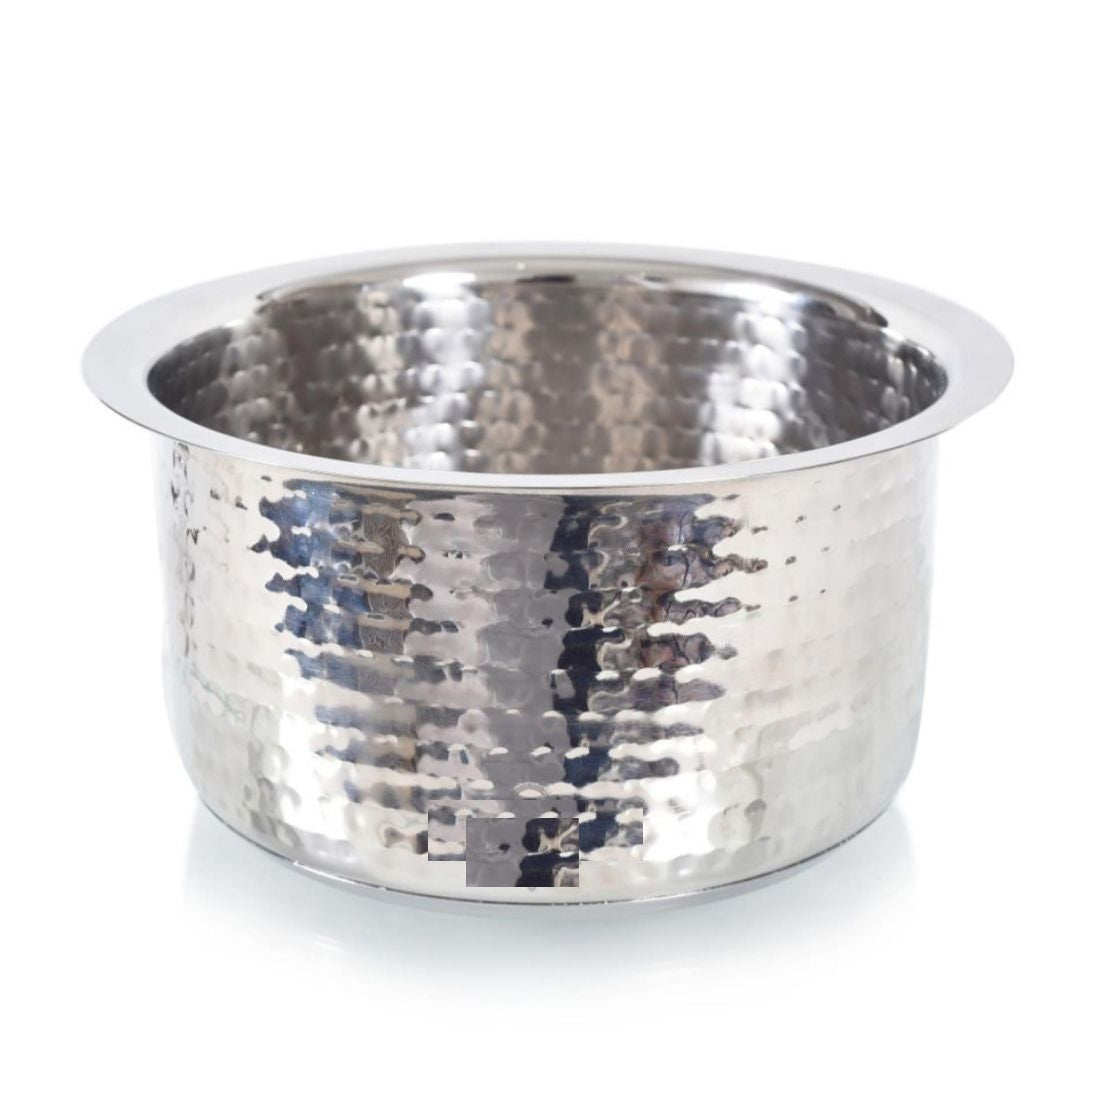 Aluminium Indian Hammered Deep Pot 2.7L with Lid No13 Round Heavy Duty 6252